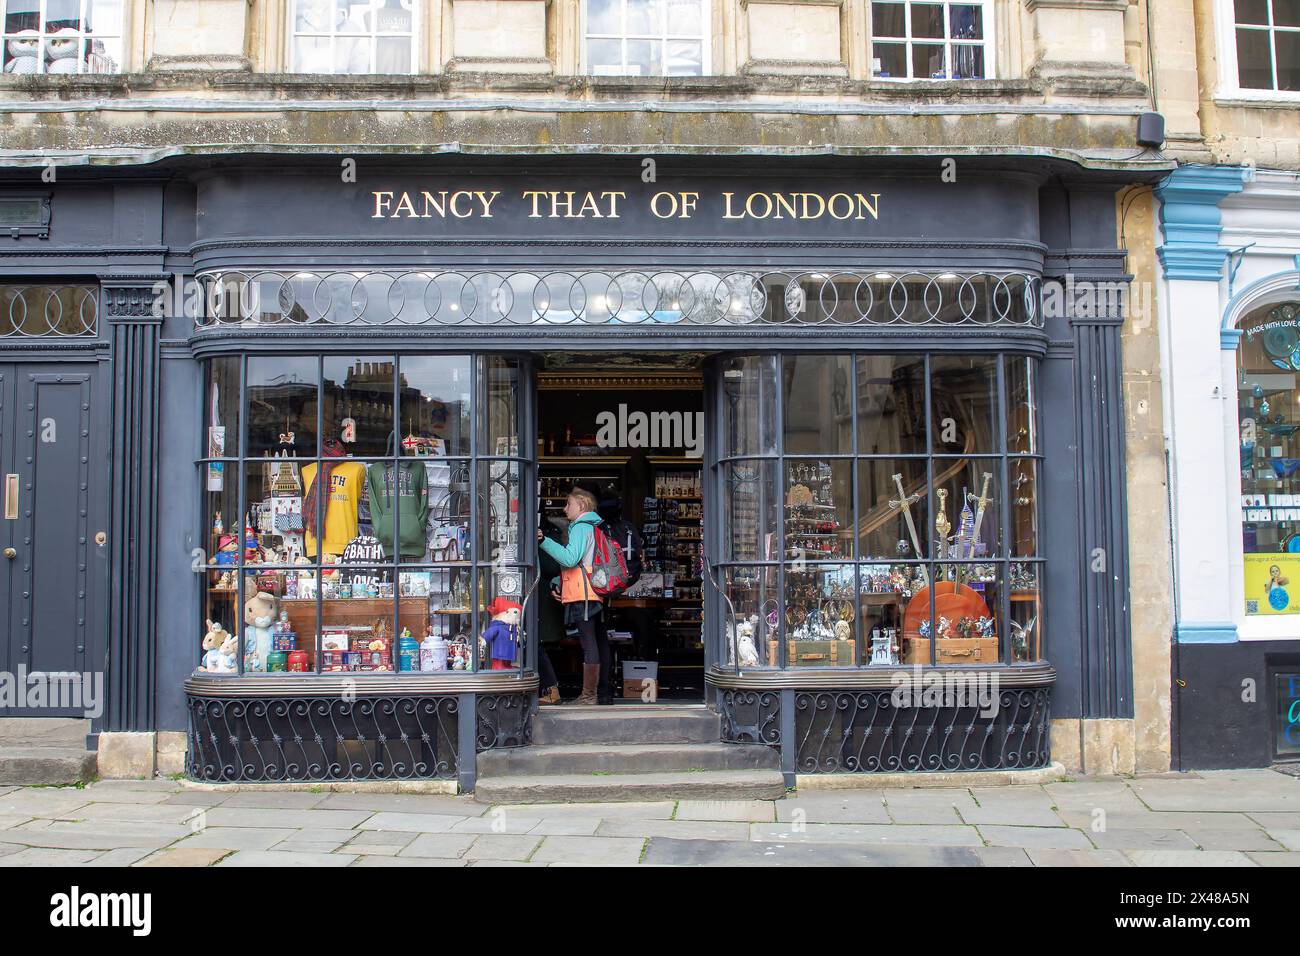 23 April 24 A customer browses in the retail business Fancy That of London souvenier shop in Abbey Church Yard Bath, Somerset  England on a fine sprin Stock Photo